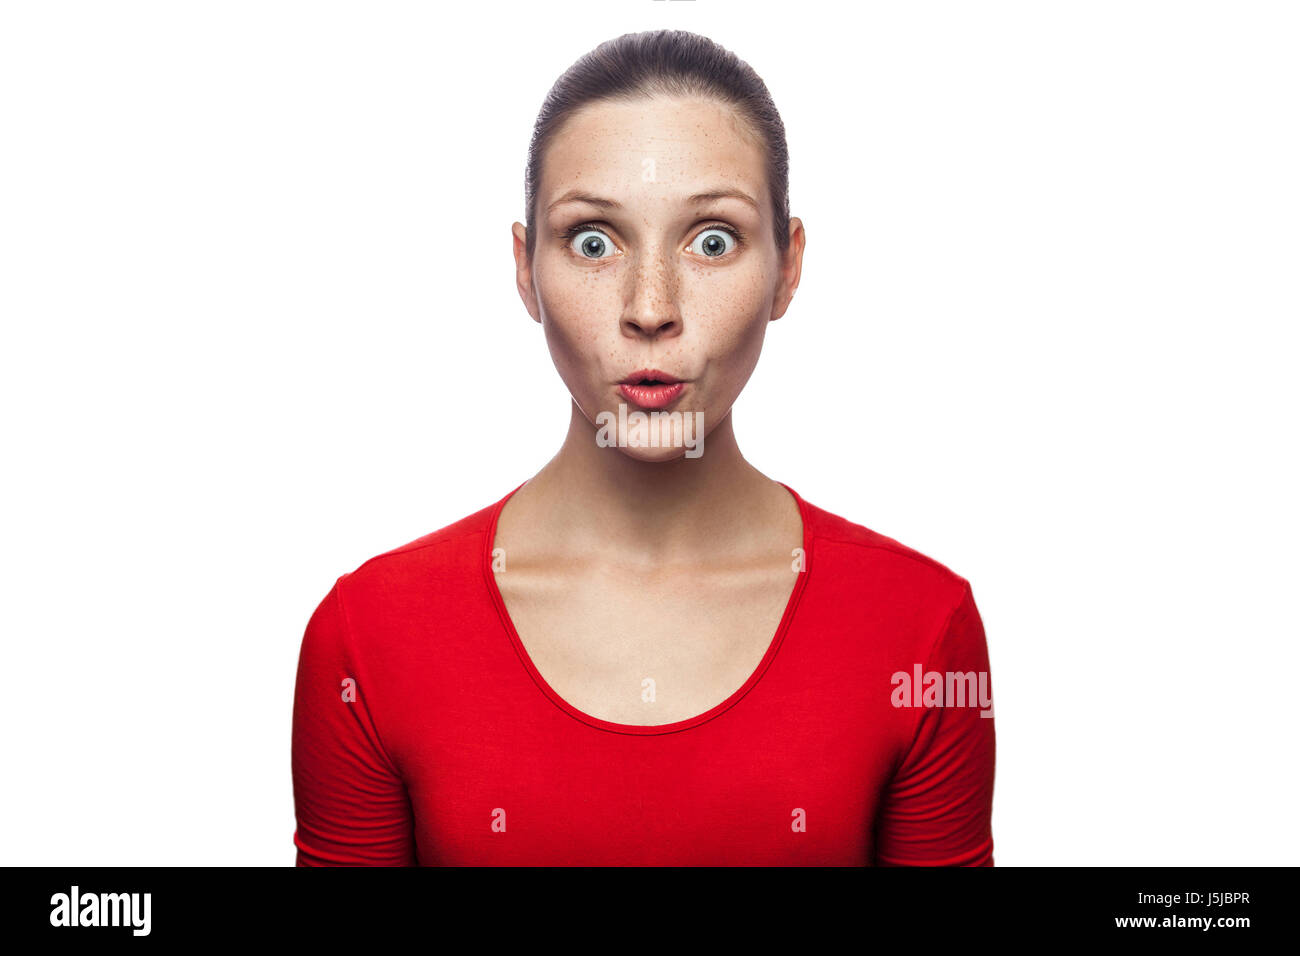 Portrait of happy surprised woman in red t-shirt with freckles. looking at camera excited with big eyes, studio shot. isolated on white background. Stock Photo